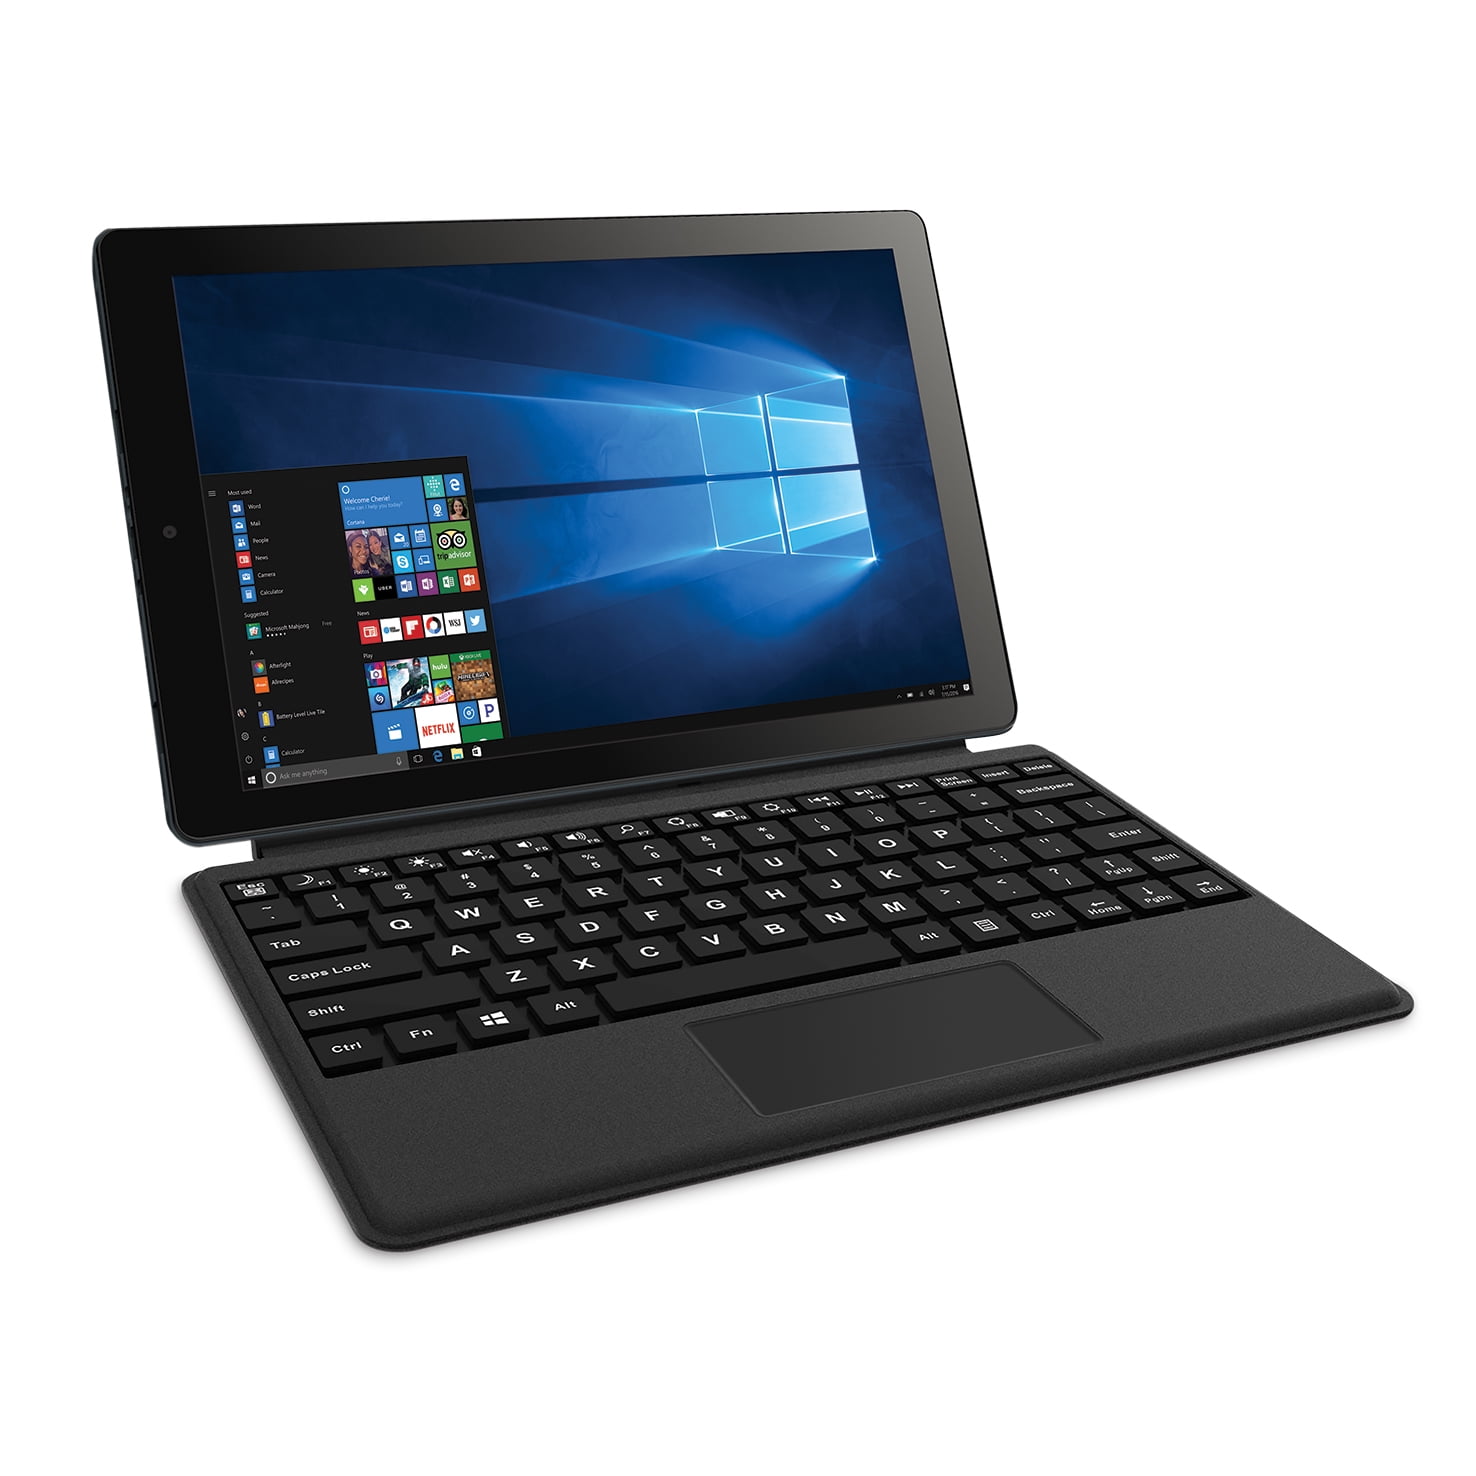 Rca Cambio 10 1 2 In 1 Windows Tablet Keyboard Charcoal